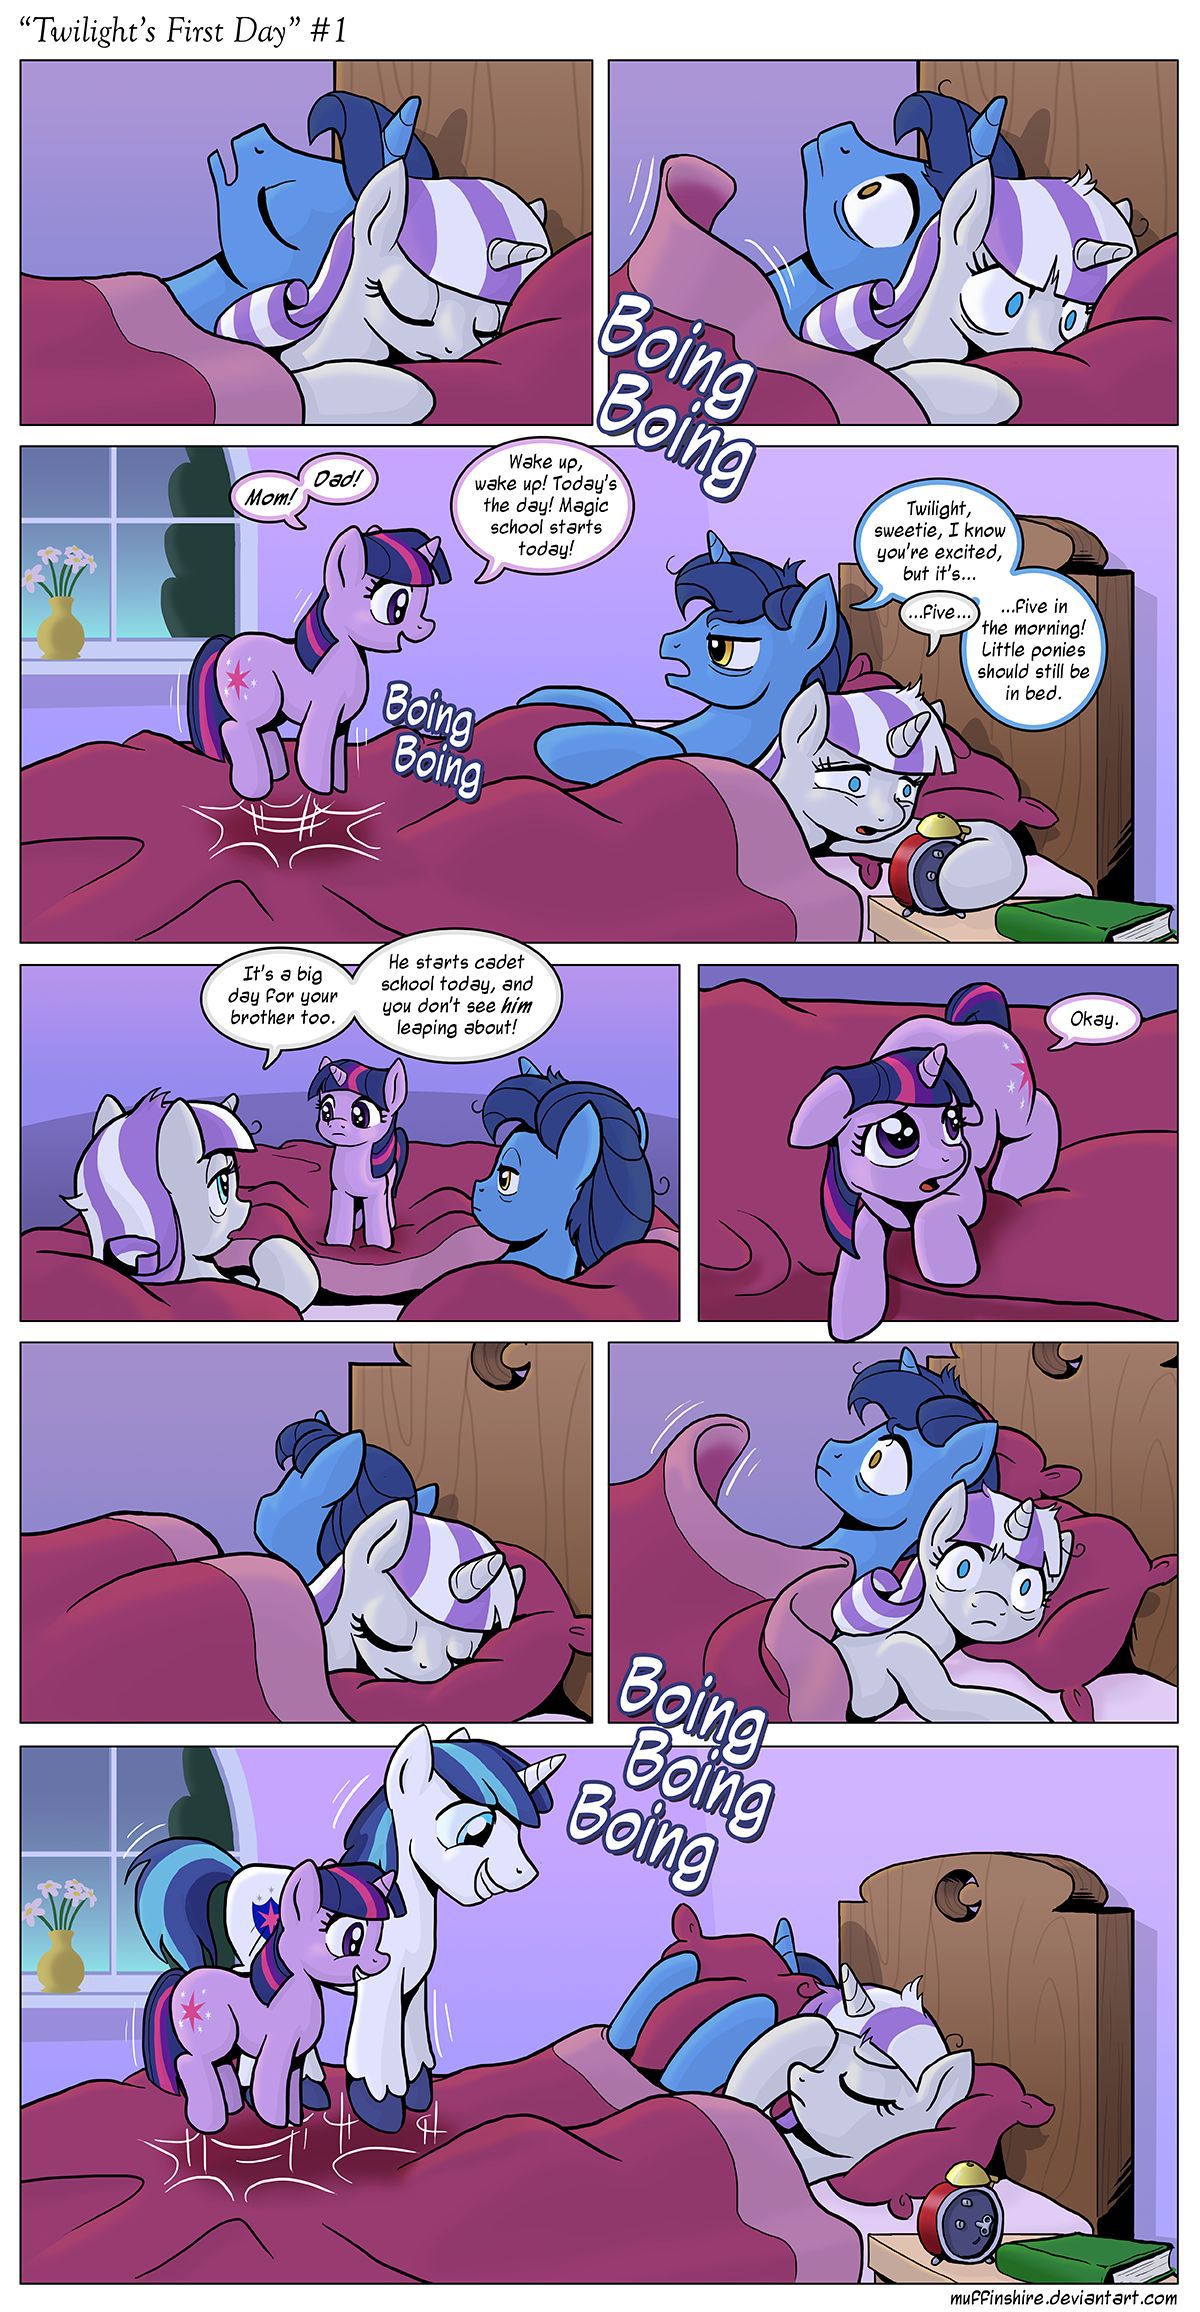 [Muffinshire] Twilight's First Day (My Little Pony: Friendship is Magic) [English] 1